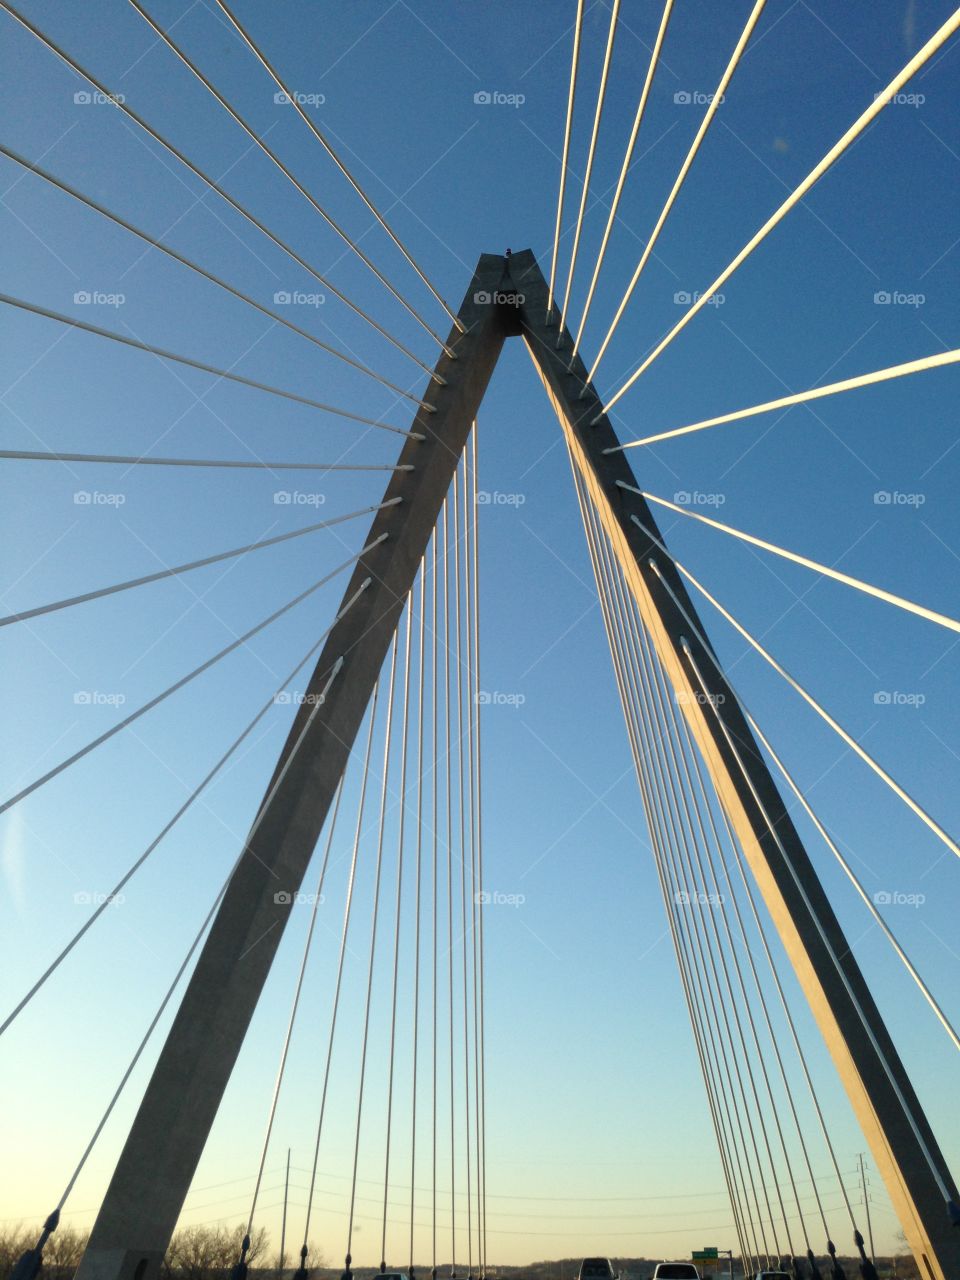 Looking up on a bridge over the Missouri River in Kansas City